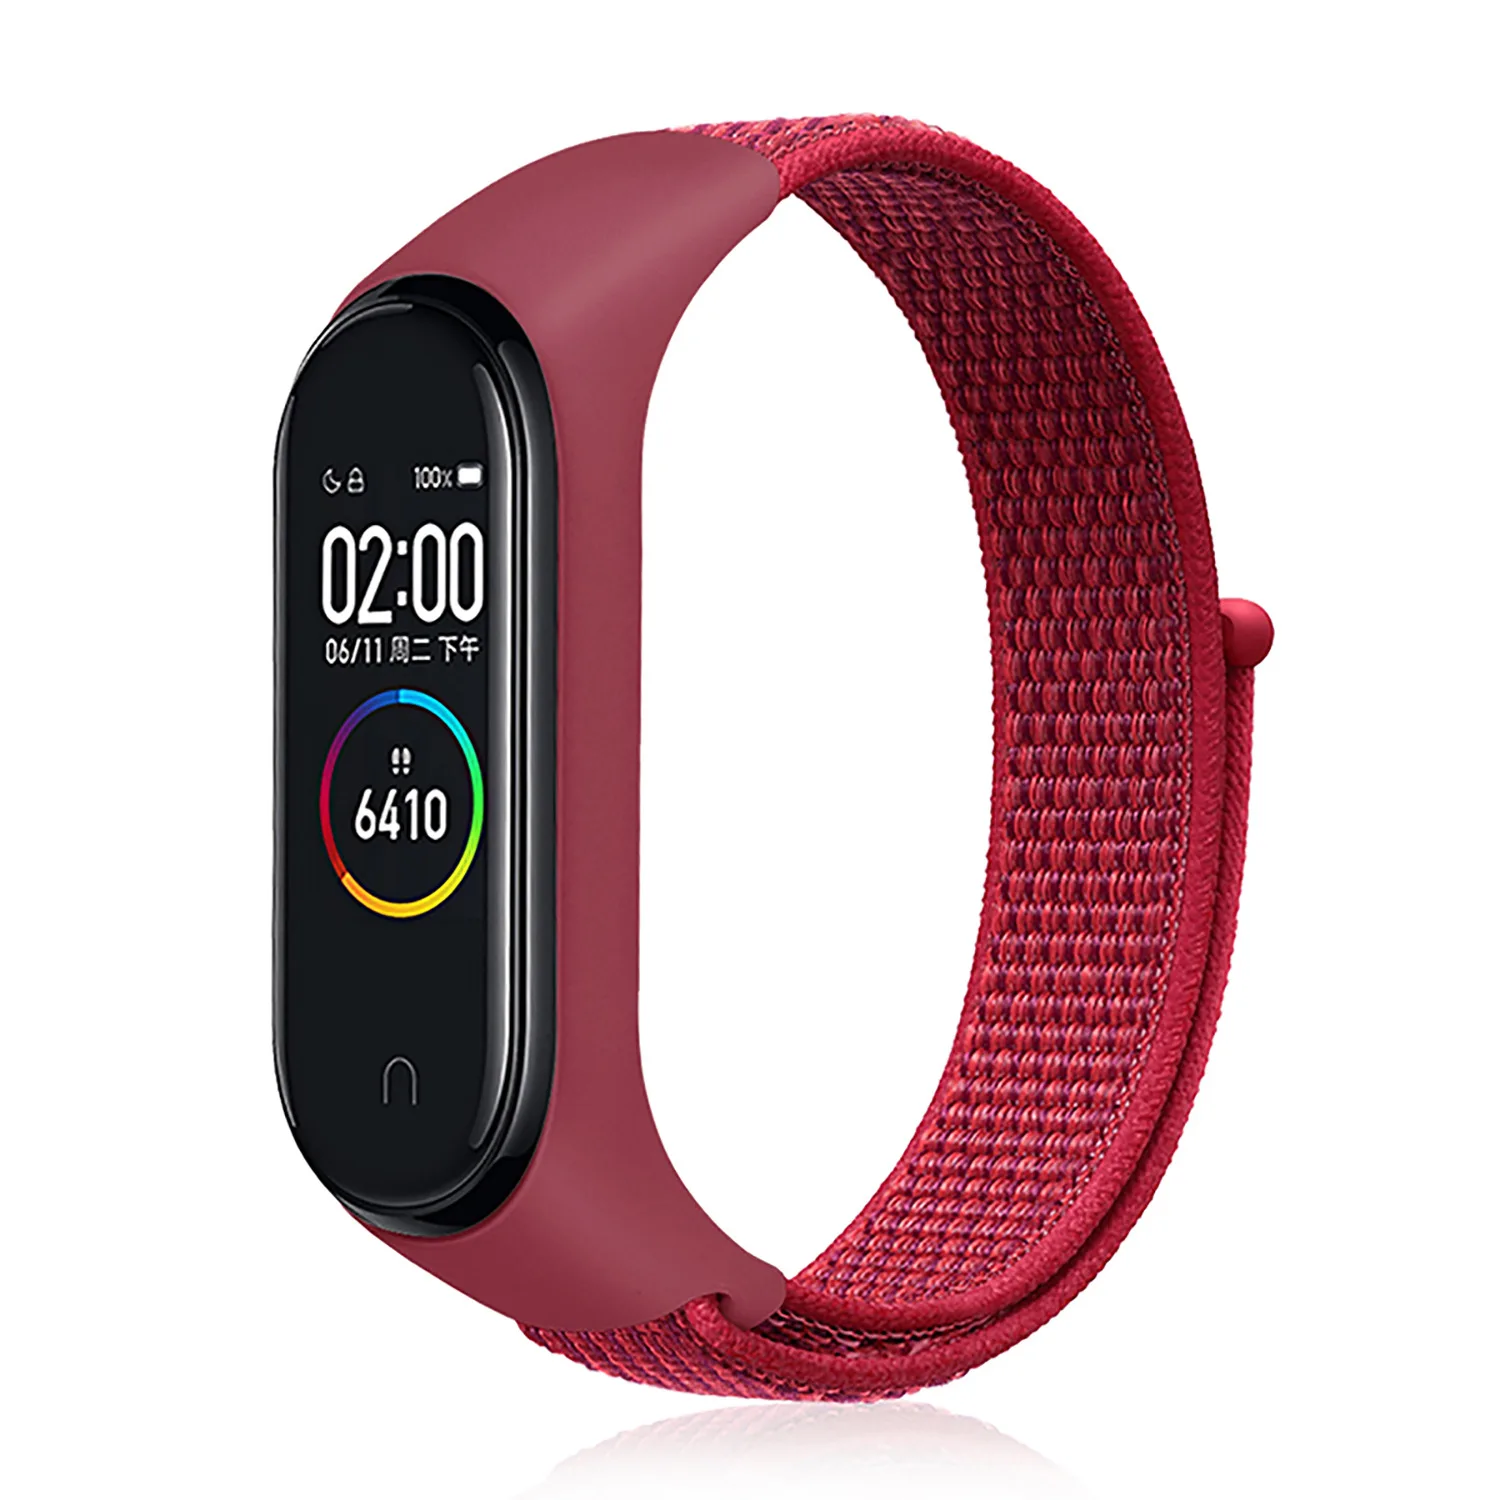 

Replaceable Wristband  Mi Band 5 4 3 Nylon Strap Wrist Sports Bracelet For Mi band 4 Miband 5 Band4 smart watch Strap, 12 colors are available